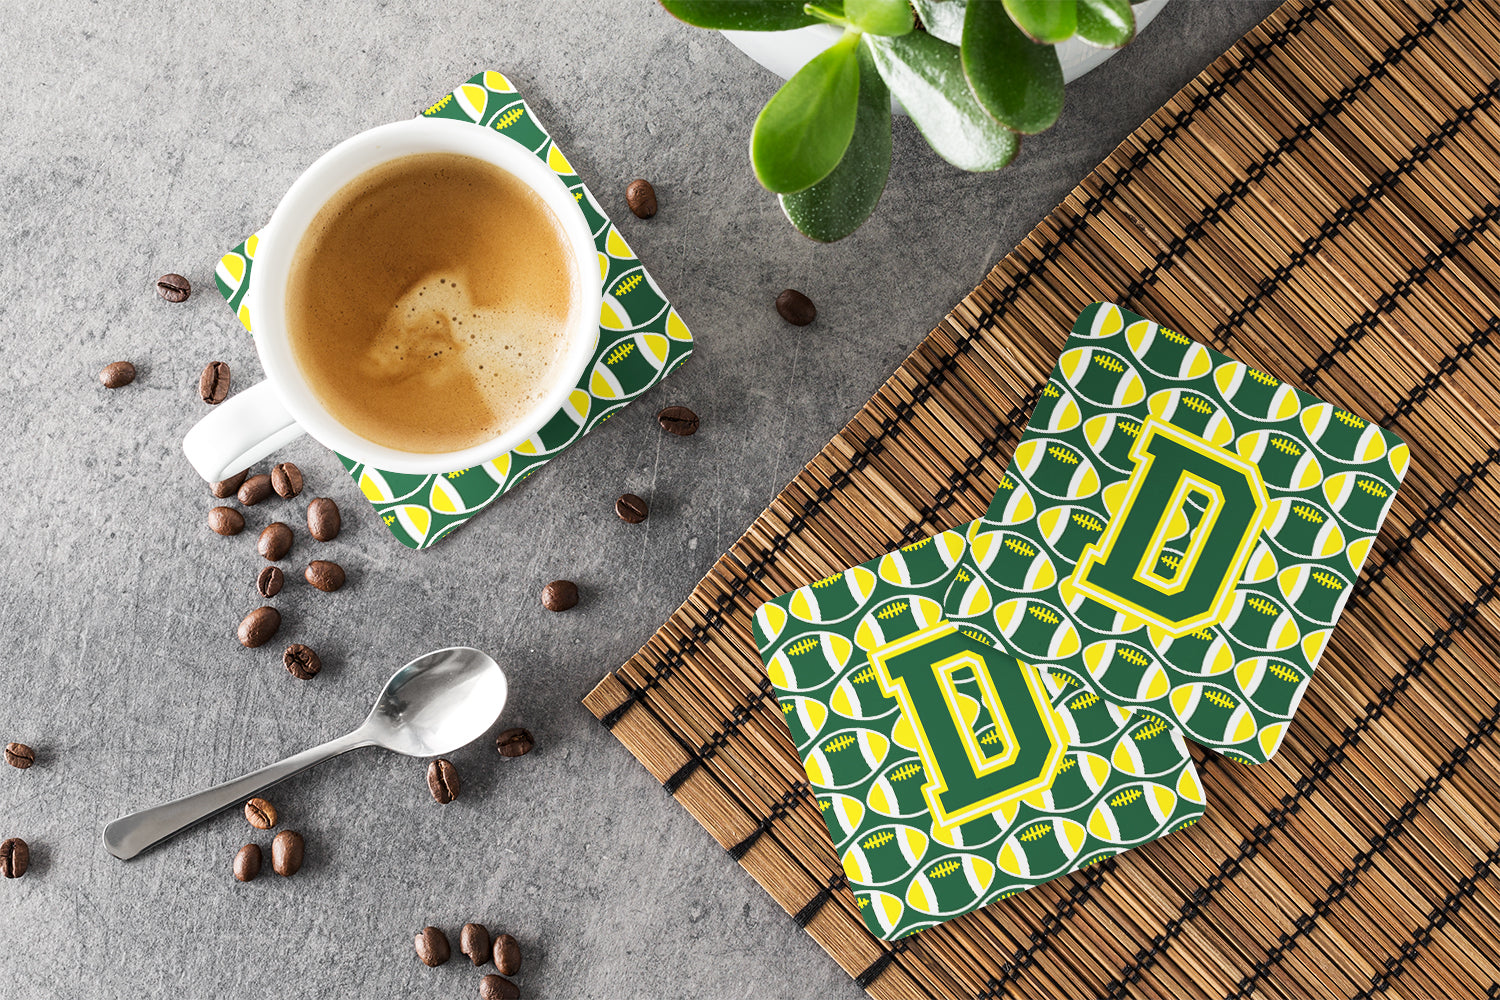 Letter D Football Green and Yellow Foam Coaster Set of 4 CJ1075-DFC - the-store.com